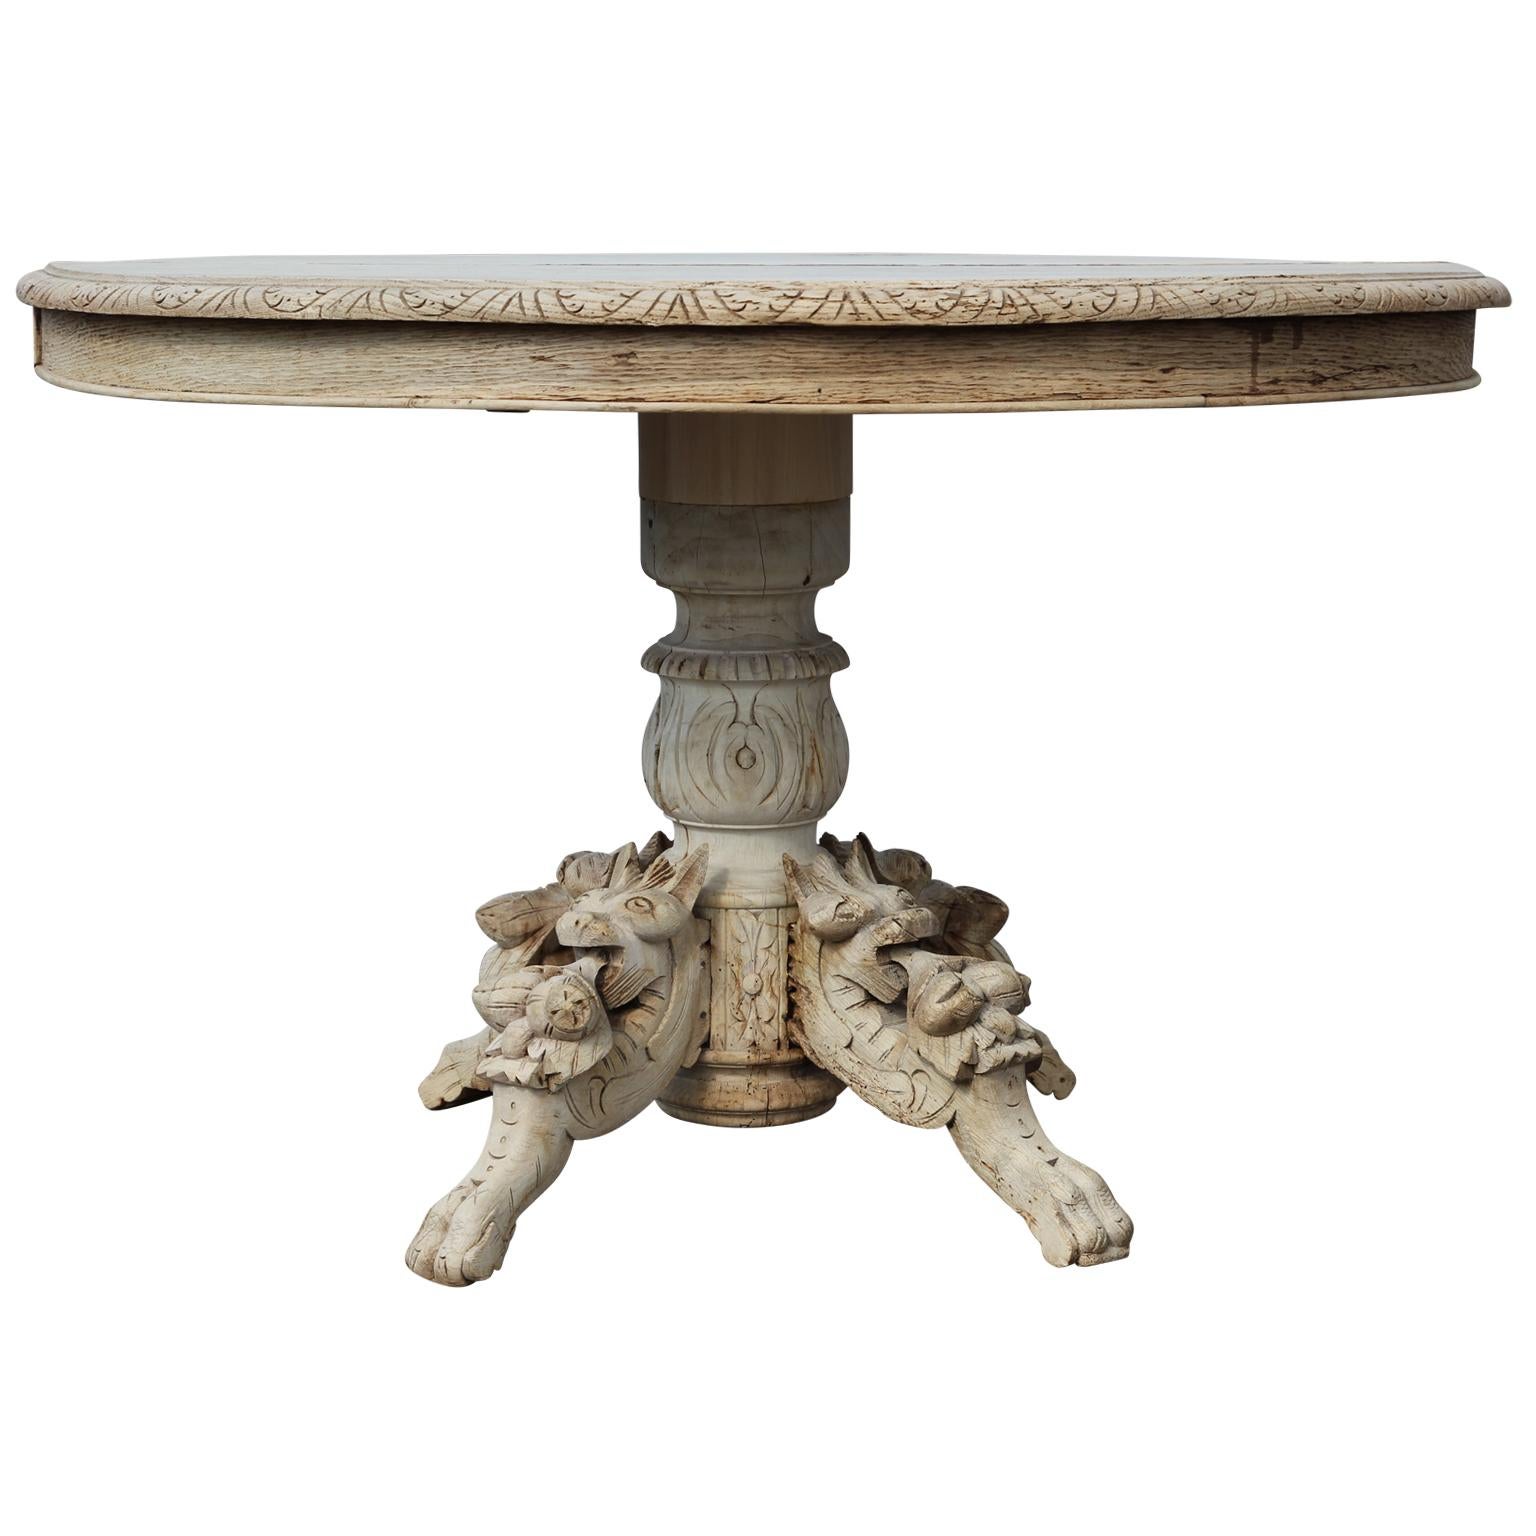 Highly carved bleached wood dining table that incorporates intricate animal motifs on each of the legs in the hunting style. The dining table is also carved with an attractive repeat pattern on the tabletop rim to add yet more visual interest.